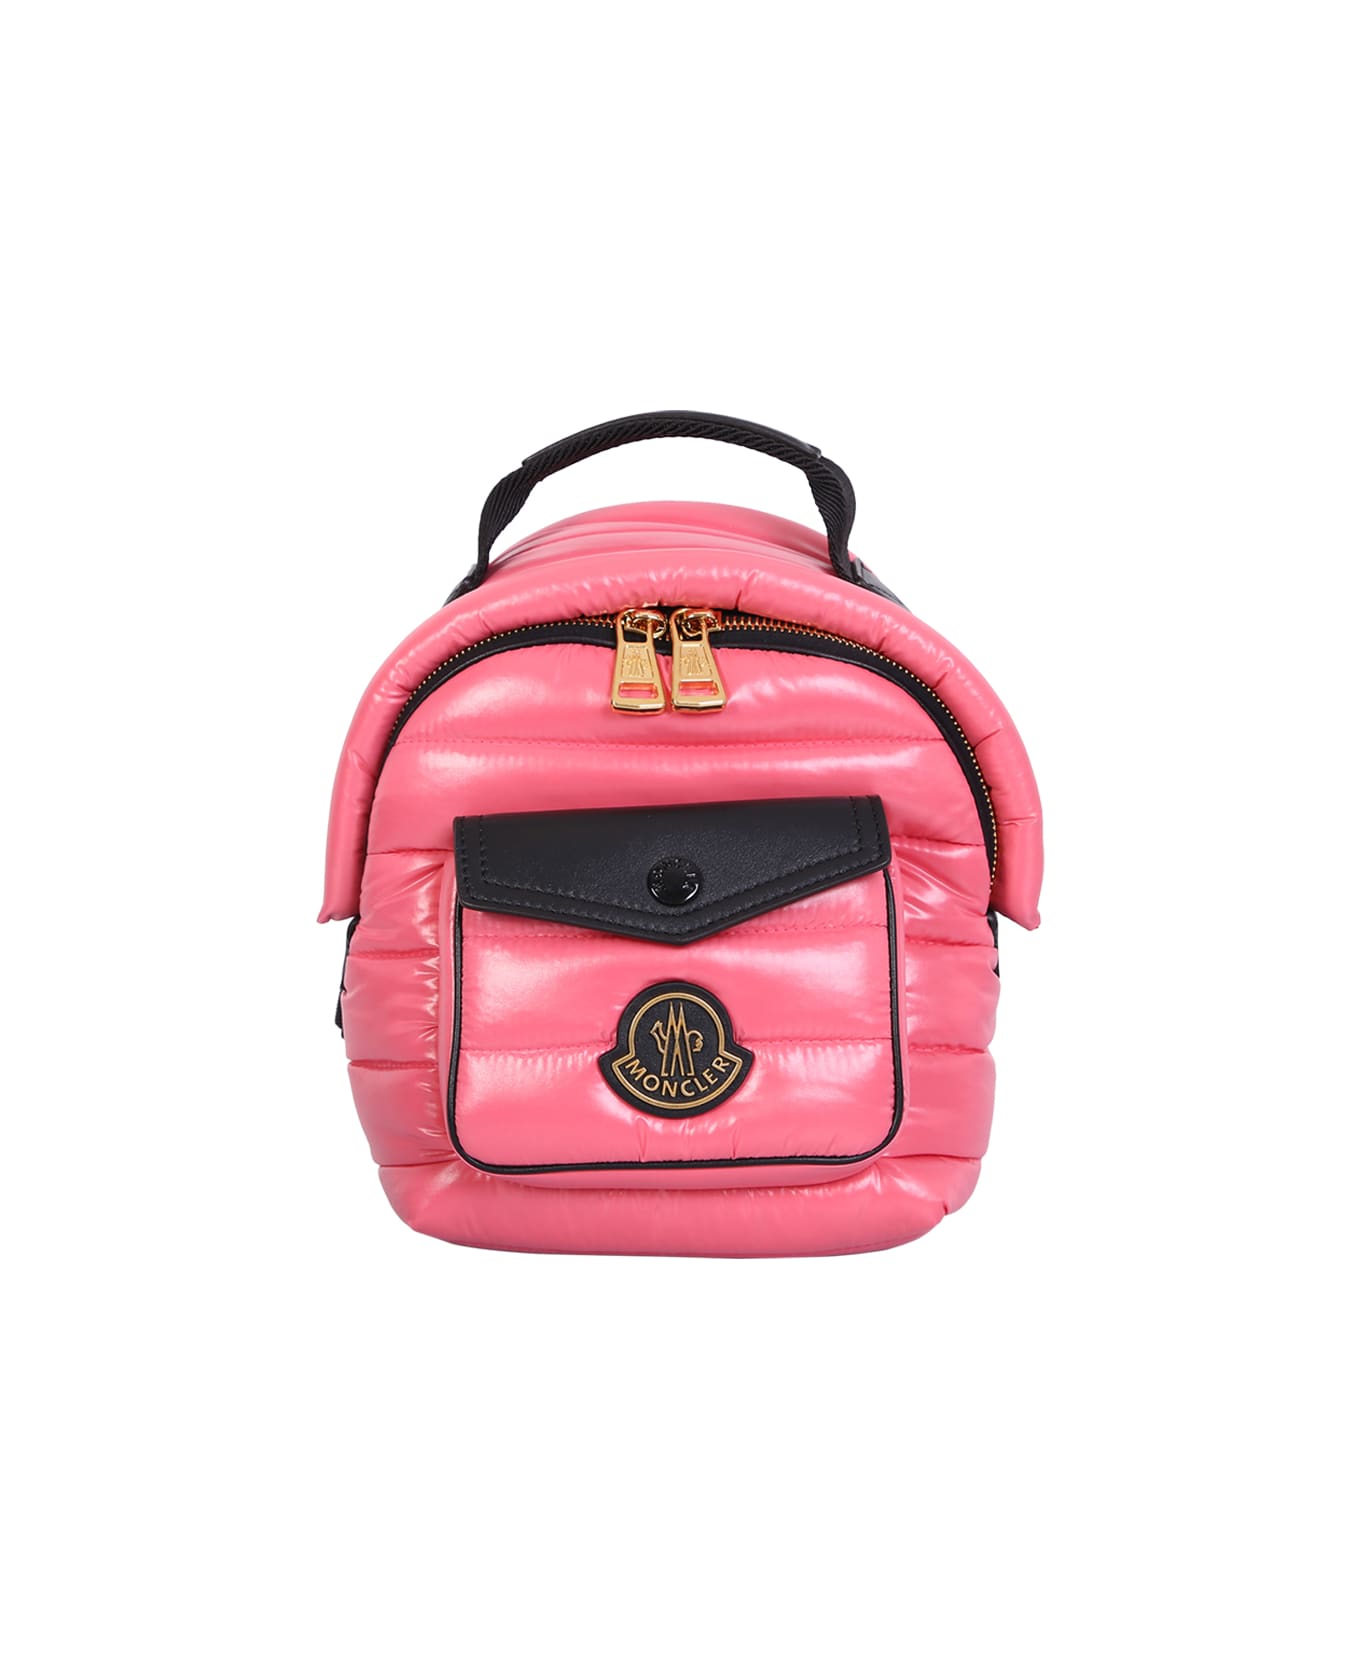 Moncler Pink Astro Mini Backpack - Pink バックパック